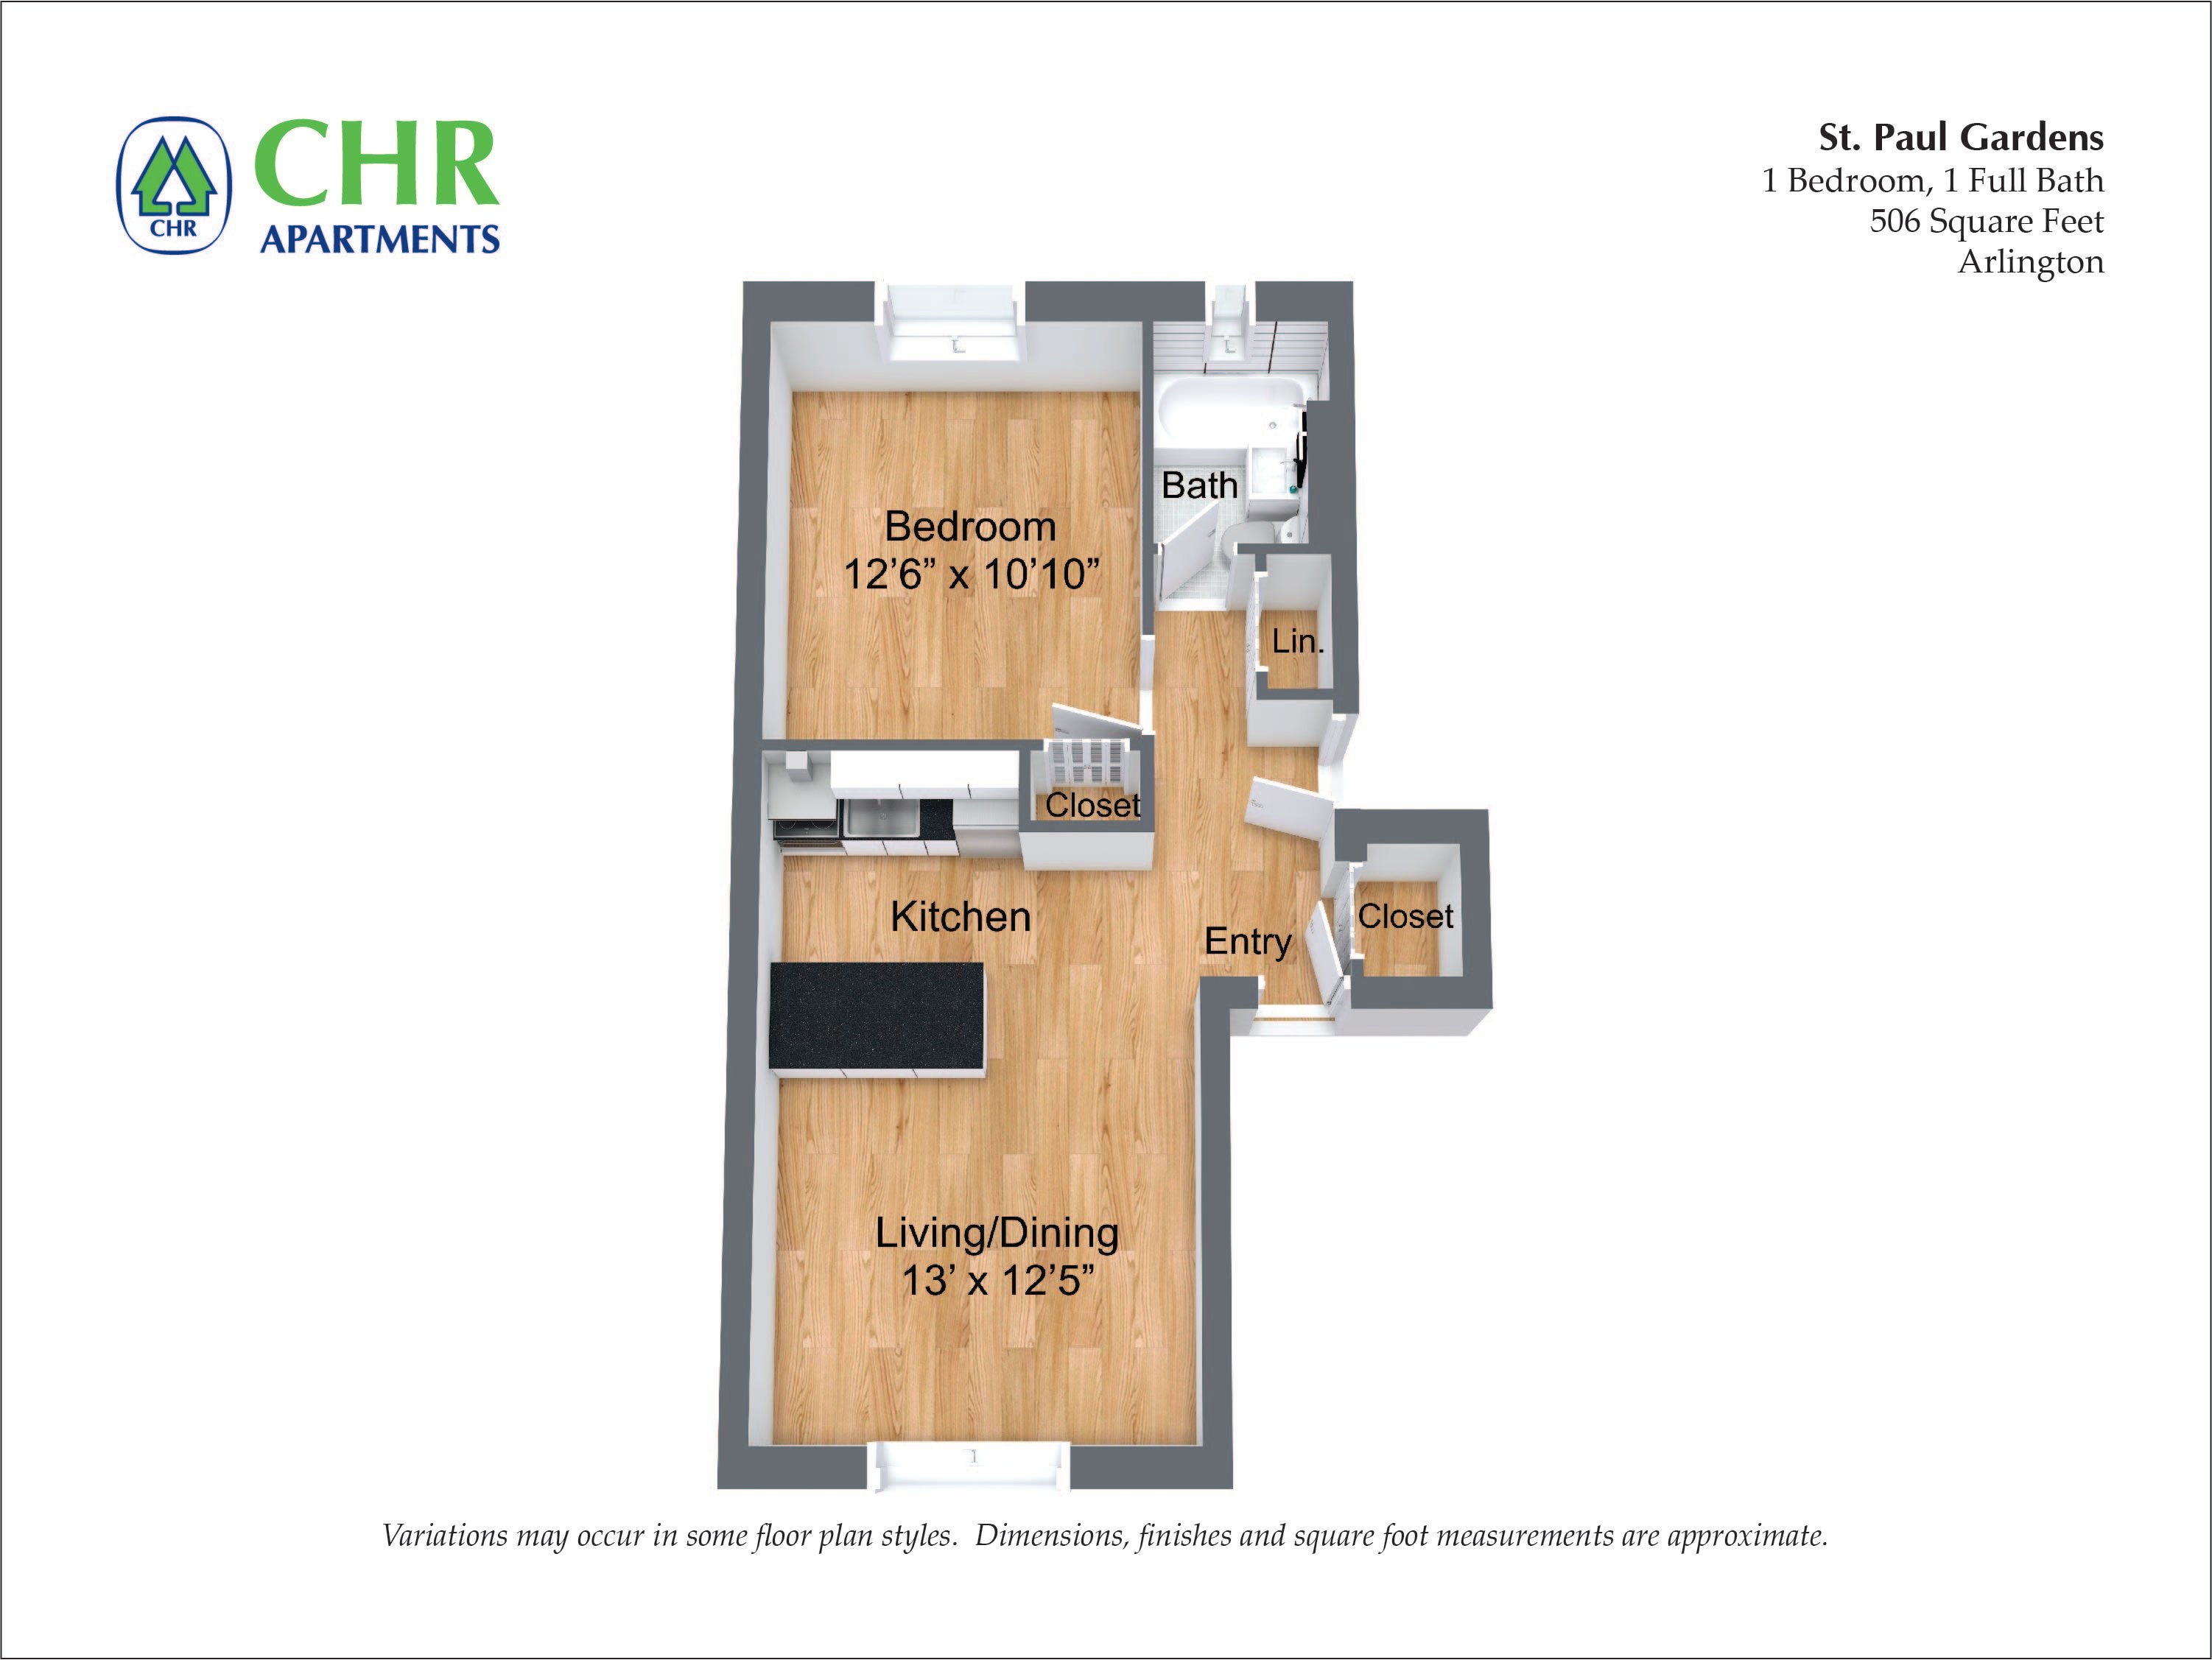 Click to view St. Paul Gardens - 1 Bed/1 Bath floor plan gallery